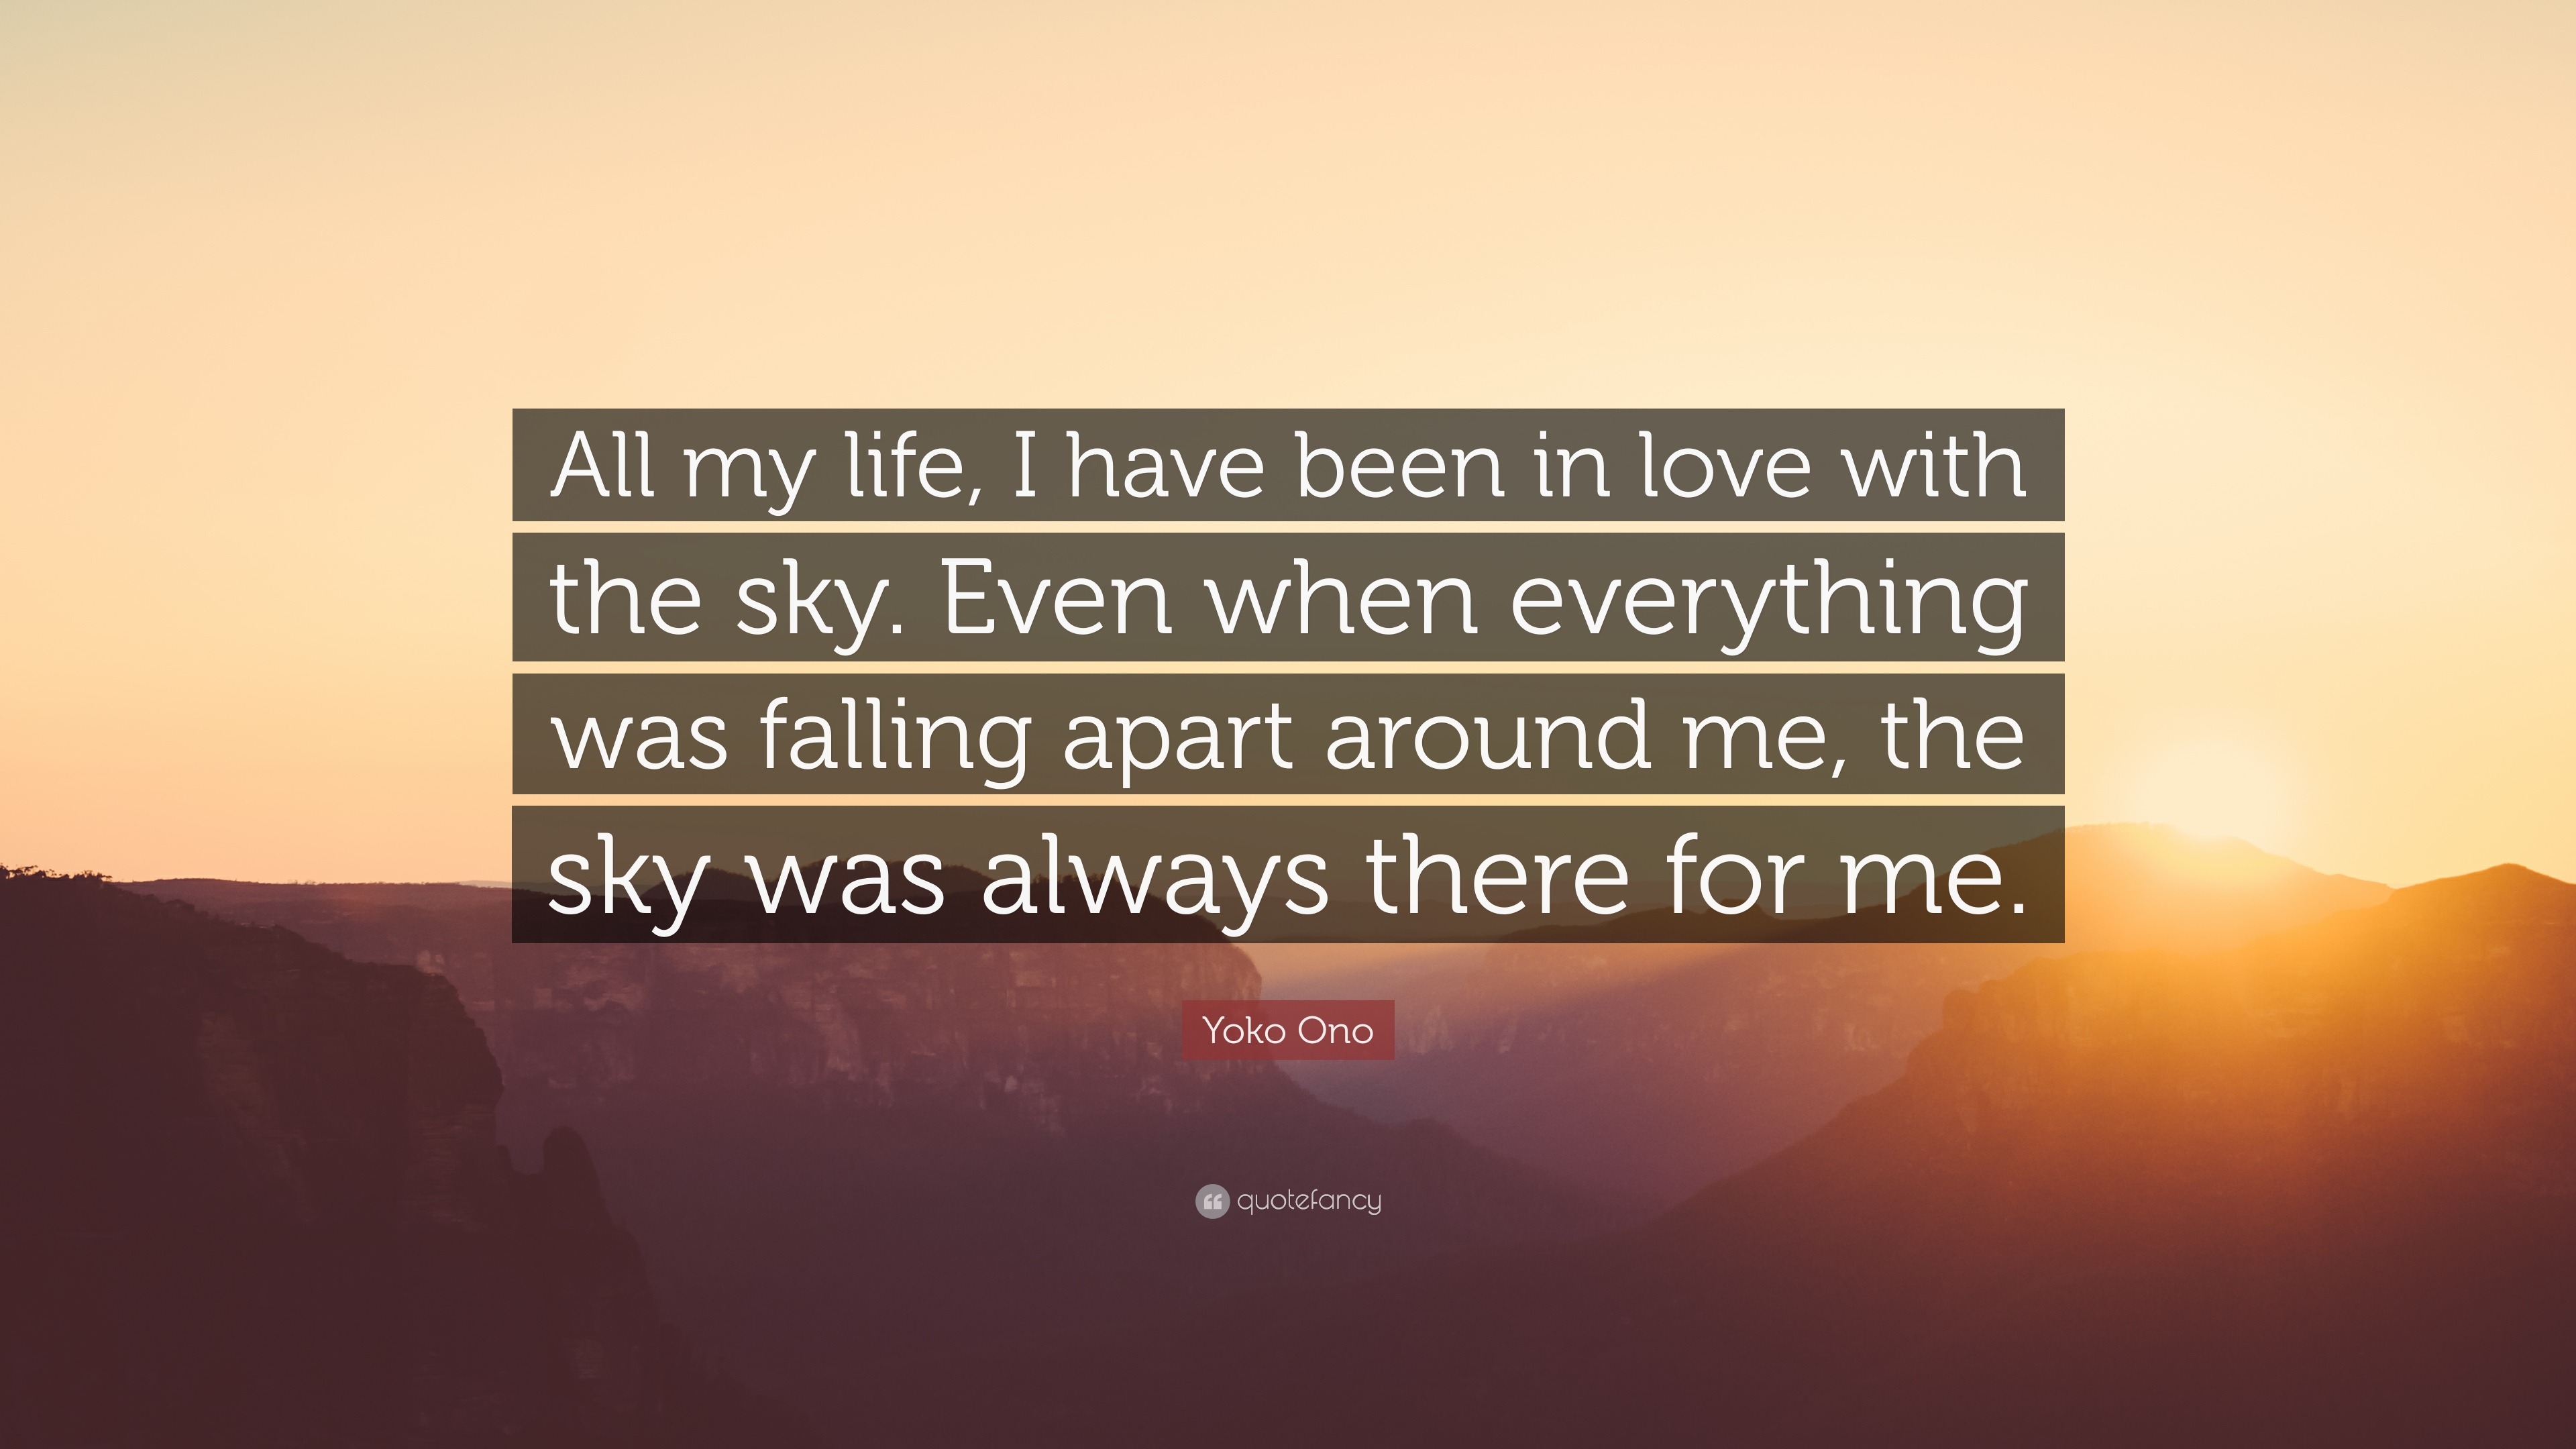 Yoko Ono Quote All My Life I Have Been In Love With The Sky Even When Everything Was Falling Apart Around Me The Sky Was Always Ther